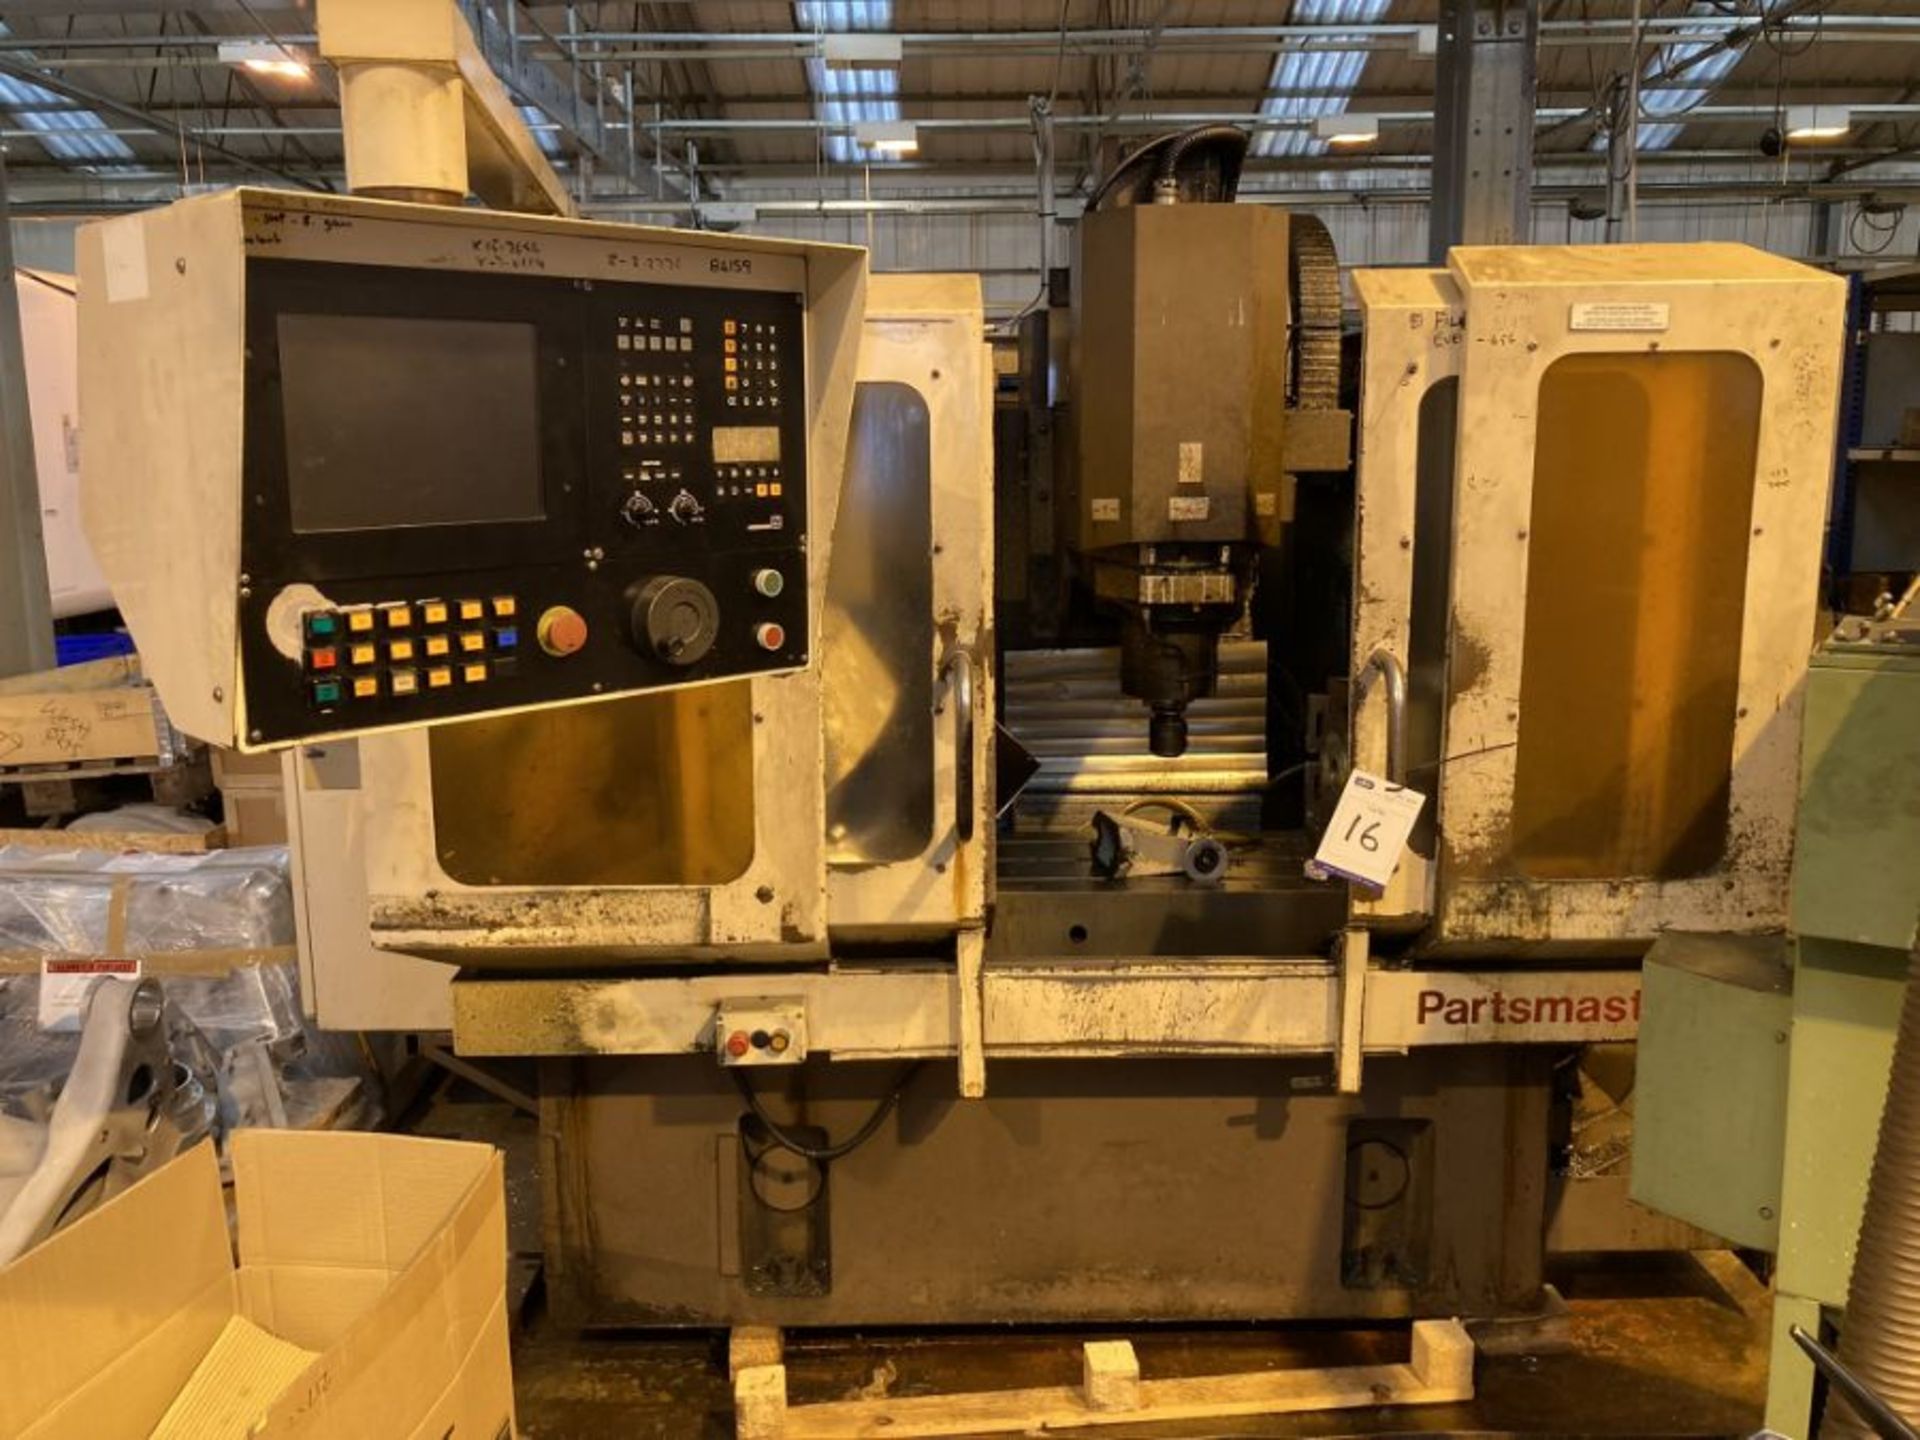 Beaver Partsmaster vertical machining centre (Sold with all faults)